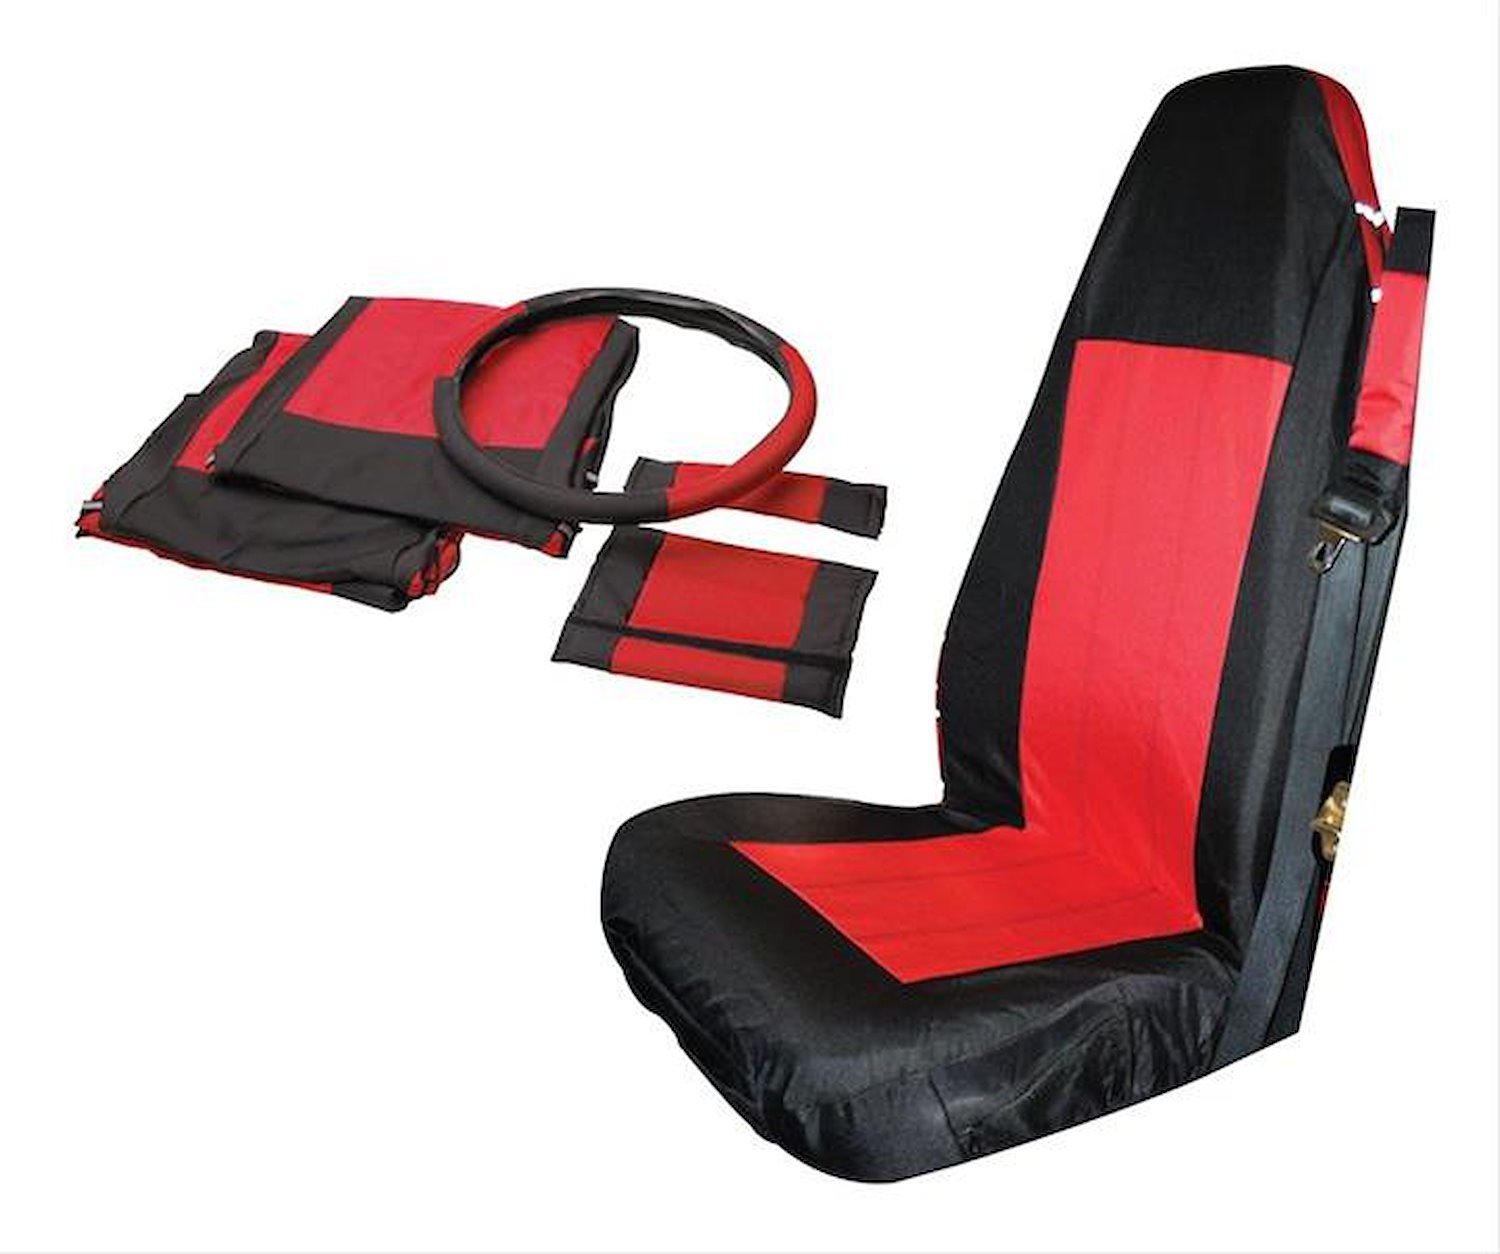 SCP20030 Front Black/Red Seat Cover, Steering Wheel Covers, Seat Belt Pads for Jeep 2003-2006 TJ Wrangler